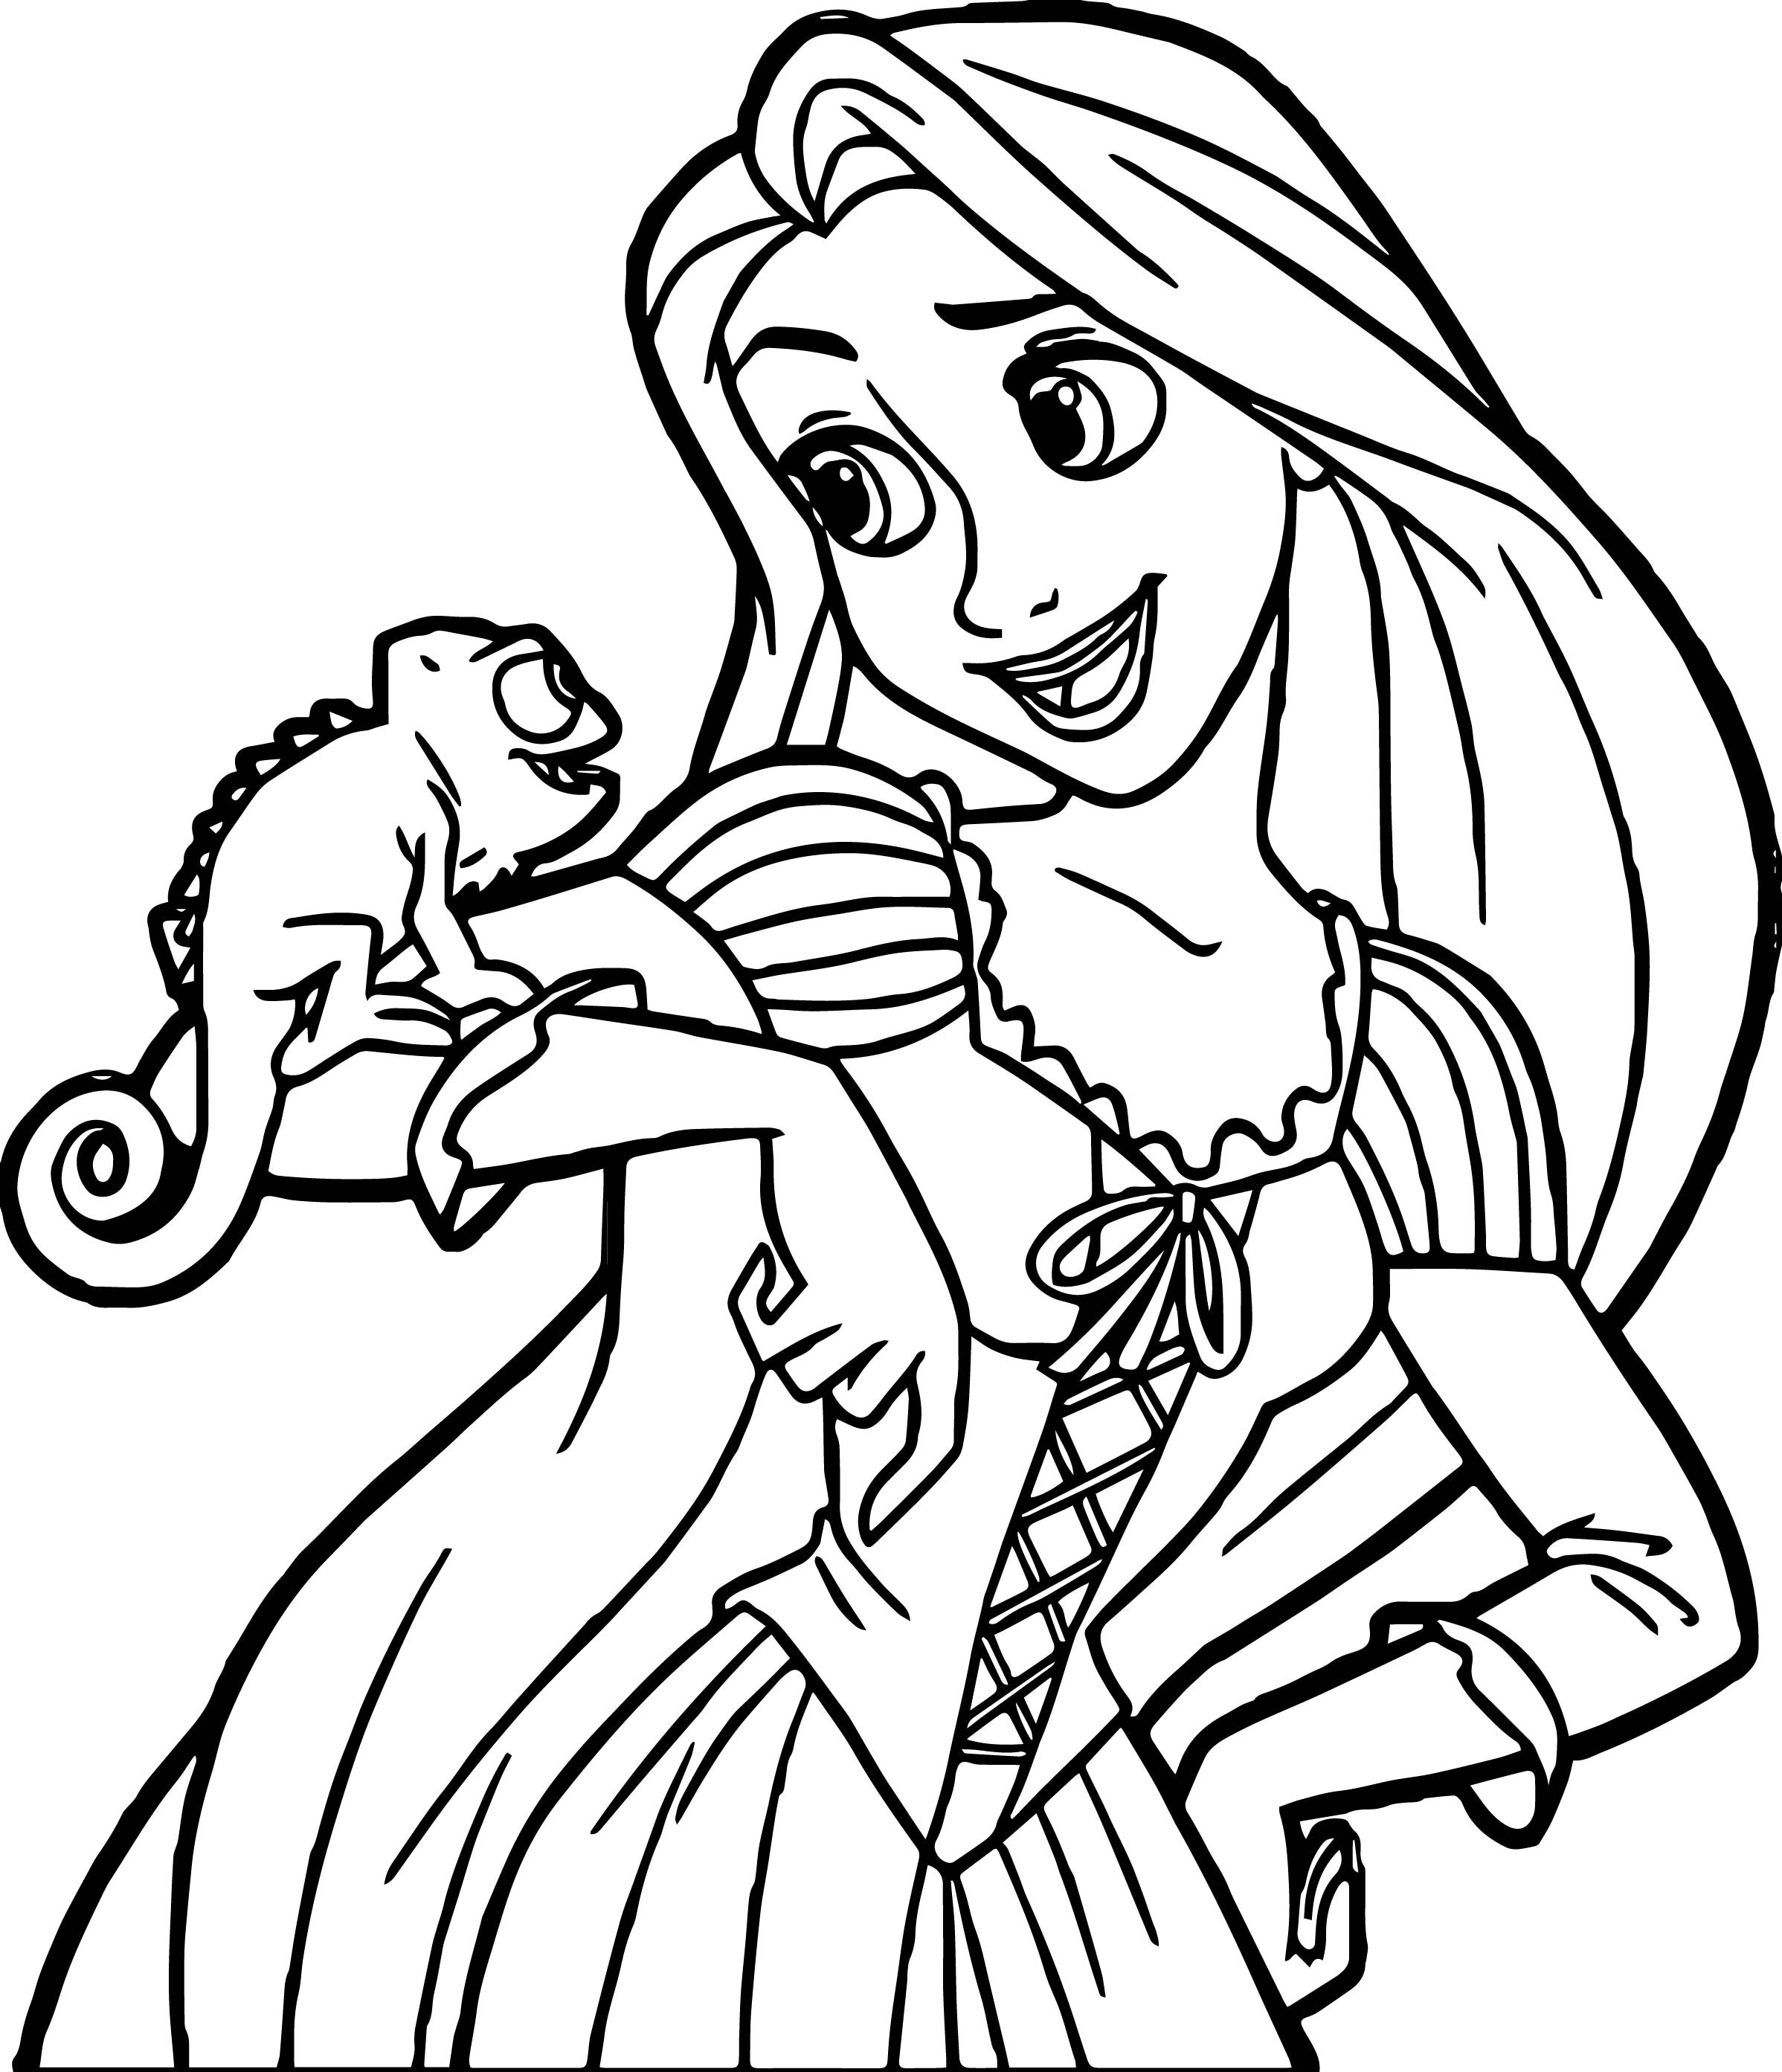 Tangled Coloring Pages
 Disney Princess Tangled Coloring Page